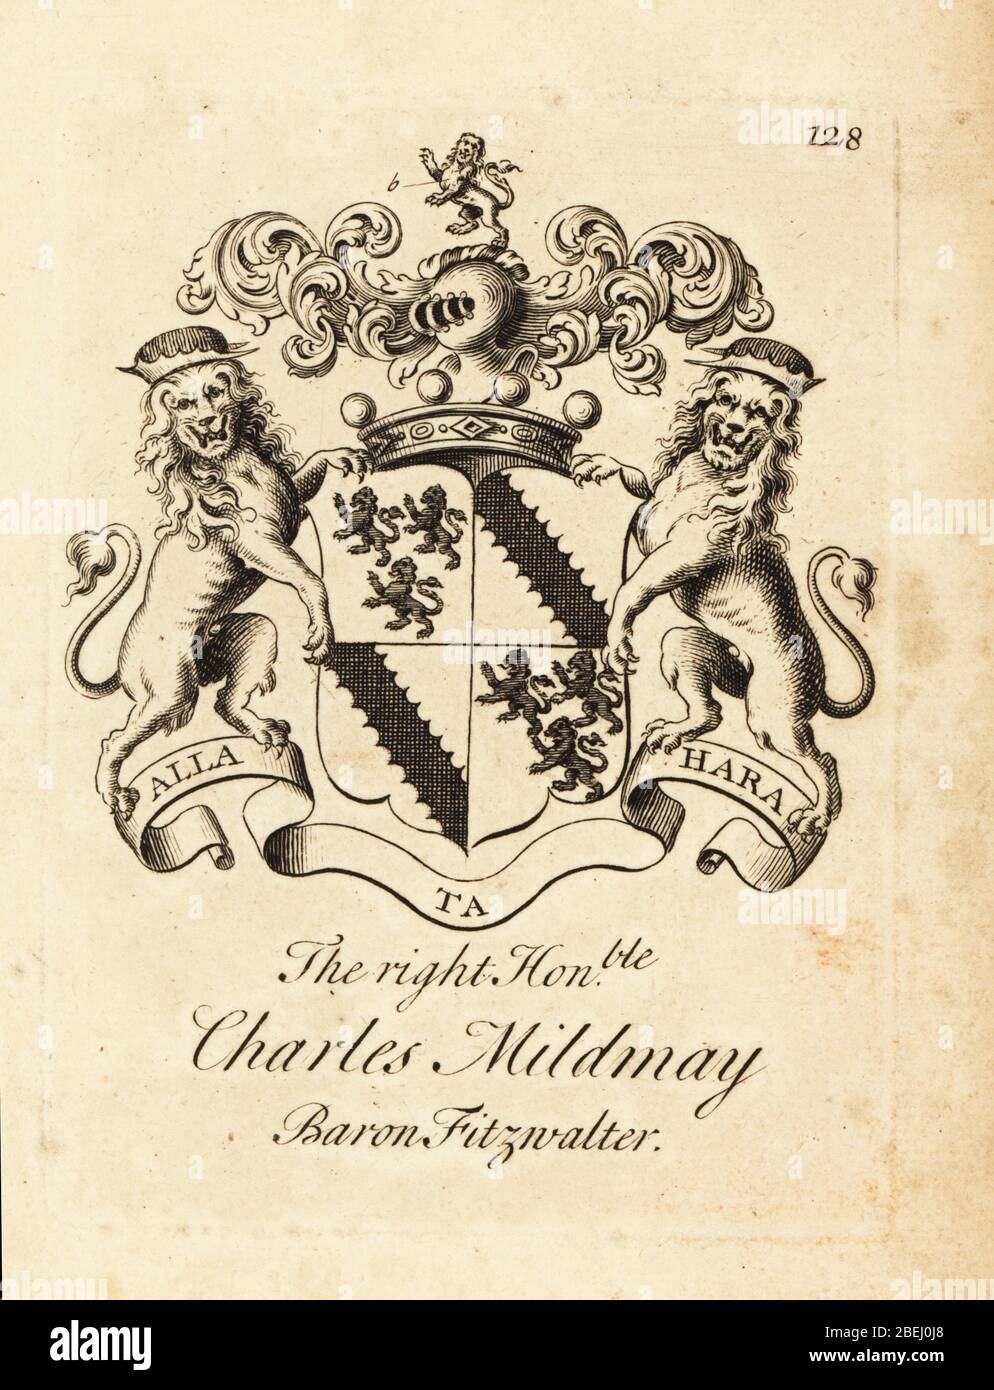 Coat of arms of the Right Honourable Charles Mildmay, 18th Baron Fitzwalter, 18th Baron FitzWalter, 1670–1728. Copperplate engraving by Andrew Johnston after C. Gardiner from Notitia Anglicana, Shewing the Achievements of all the English Nobility, Andrew Johnson, the Strand, London, 1724. Stock Photo